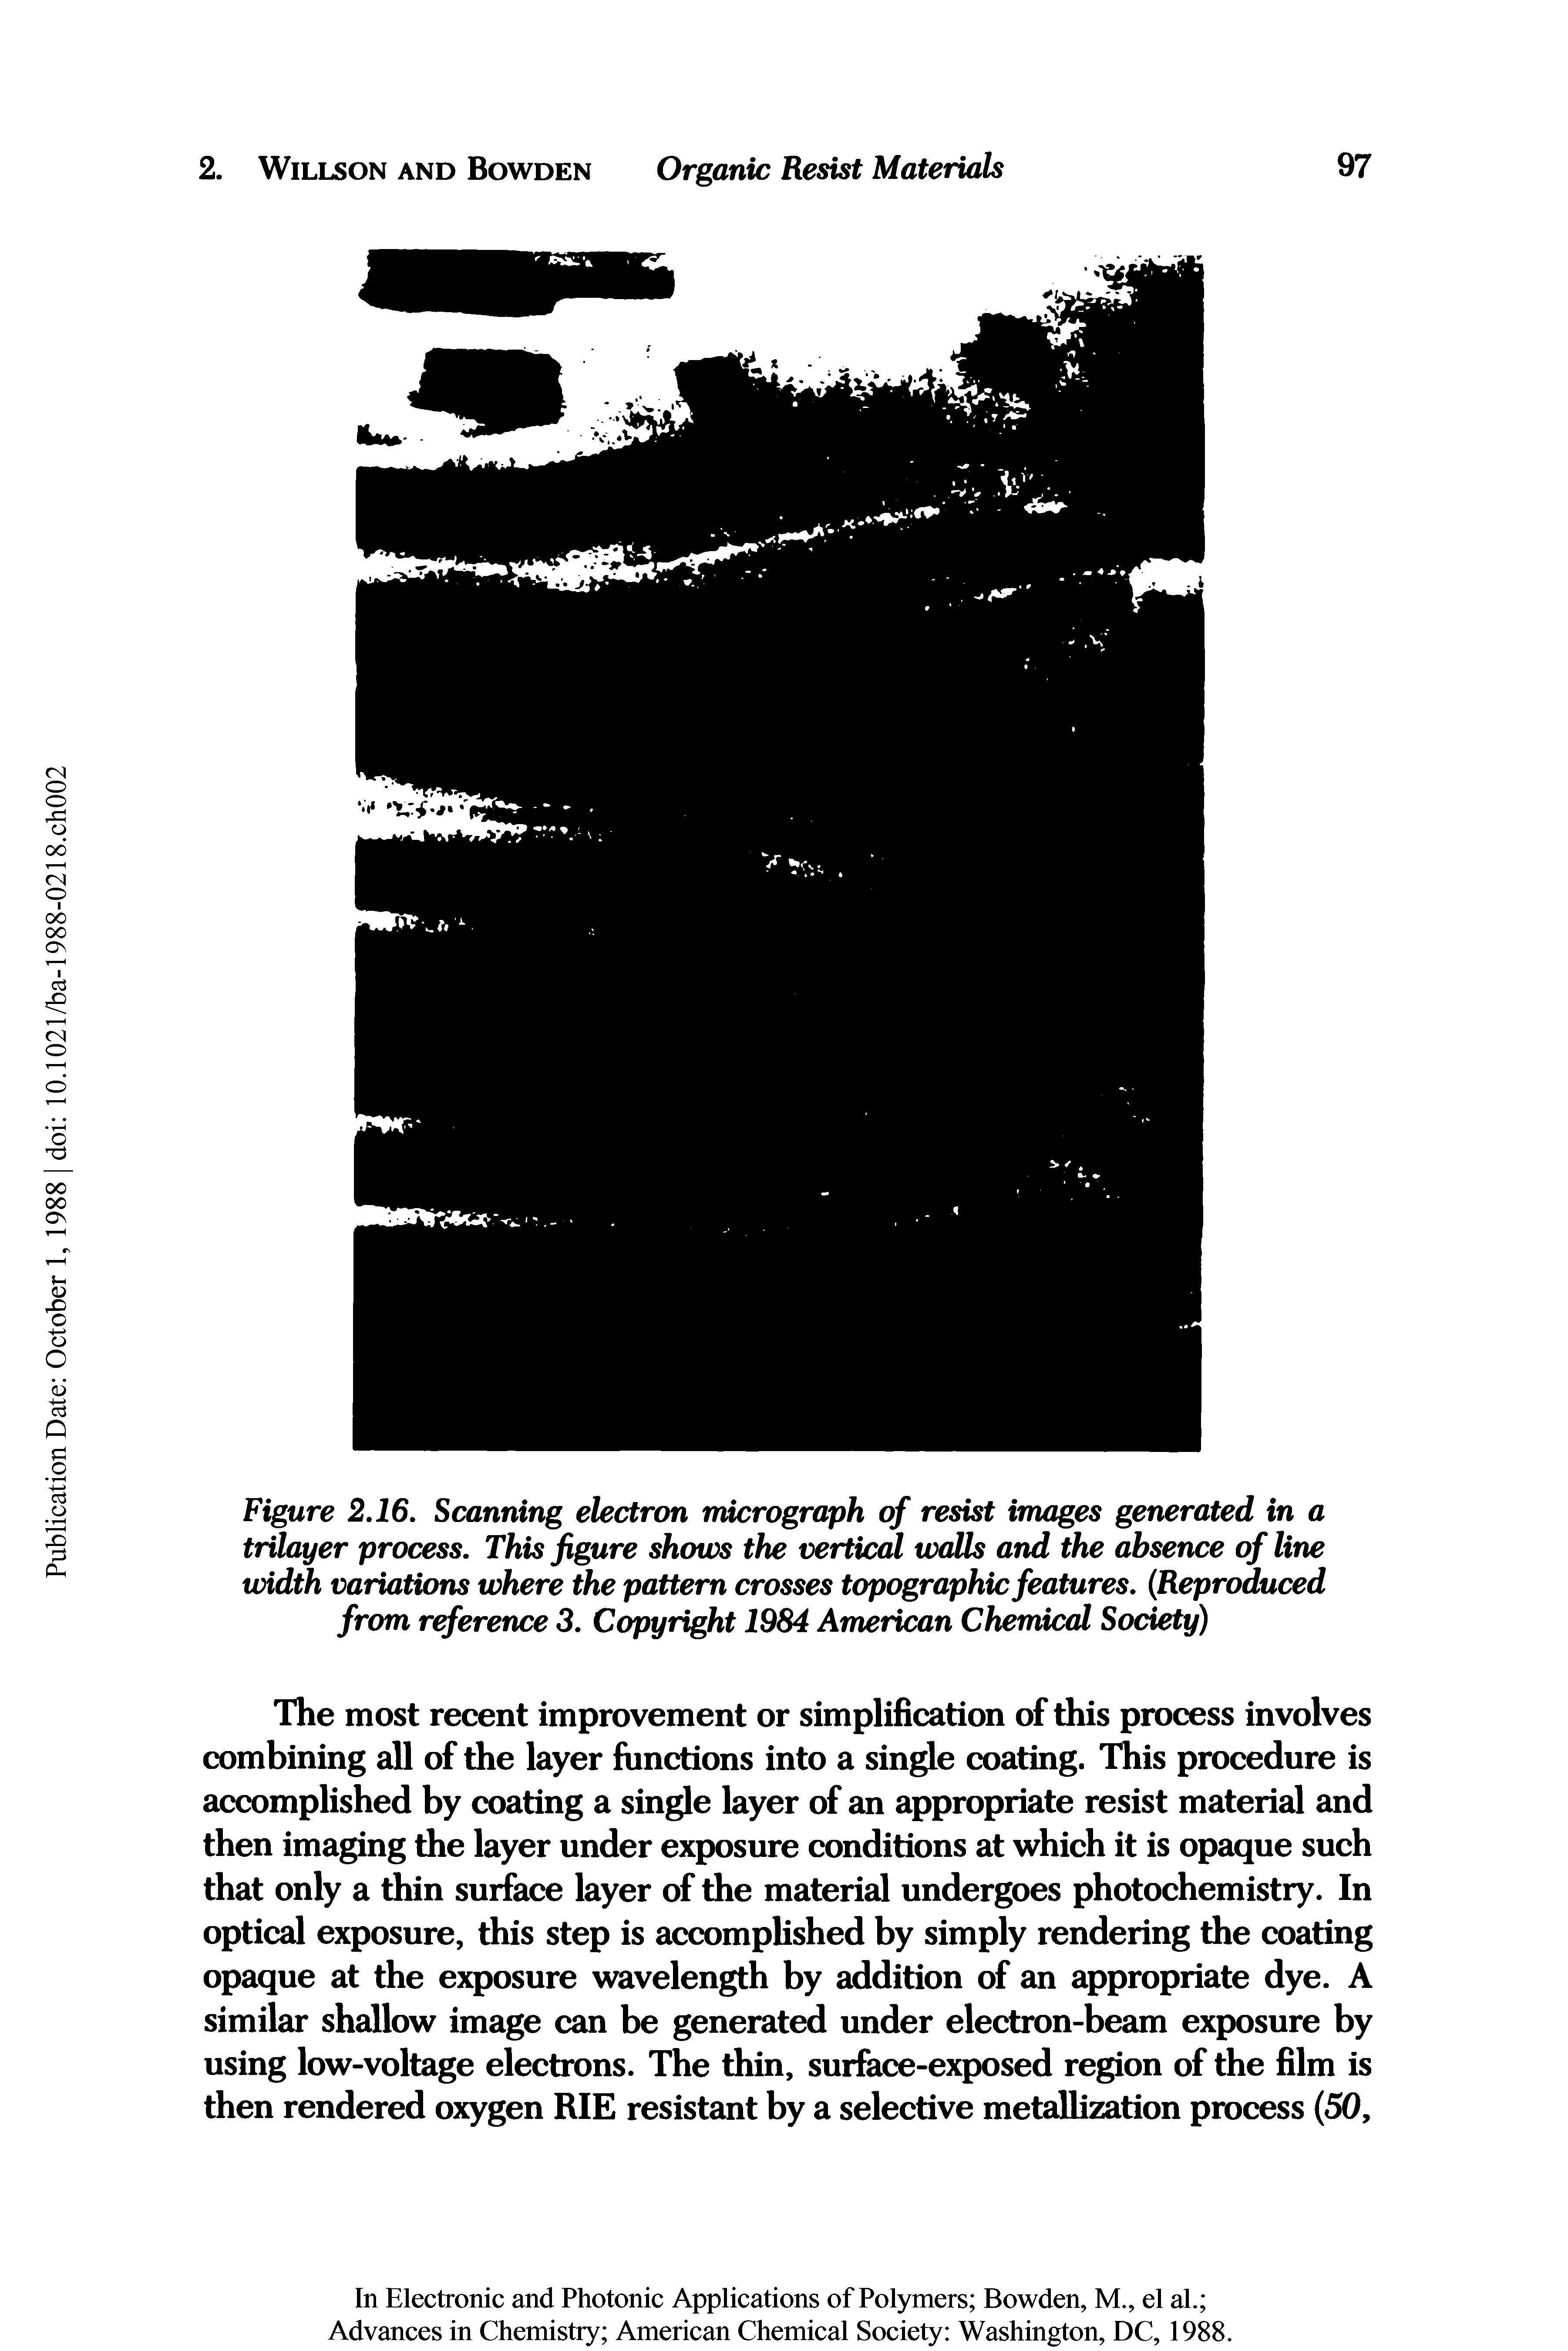 Figure 2.16, Scanning electron micrograph of resist images generated in a trilayer process. This figure shows the vertical walls and the absence of line width variations where the pattern crosses topographic features. Reproduced from reference 3. Copyright 1984 American Chemical Society)...